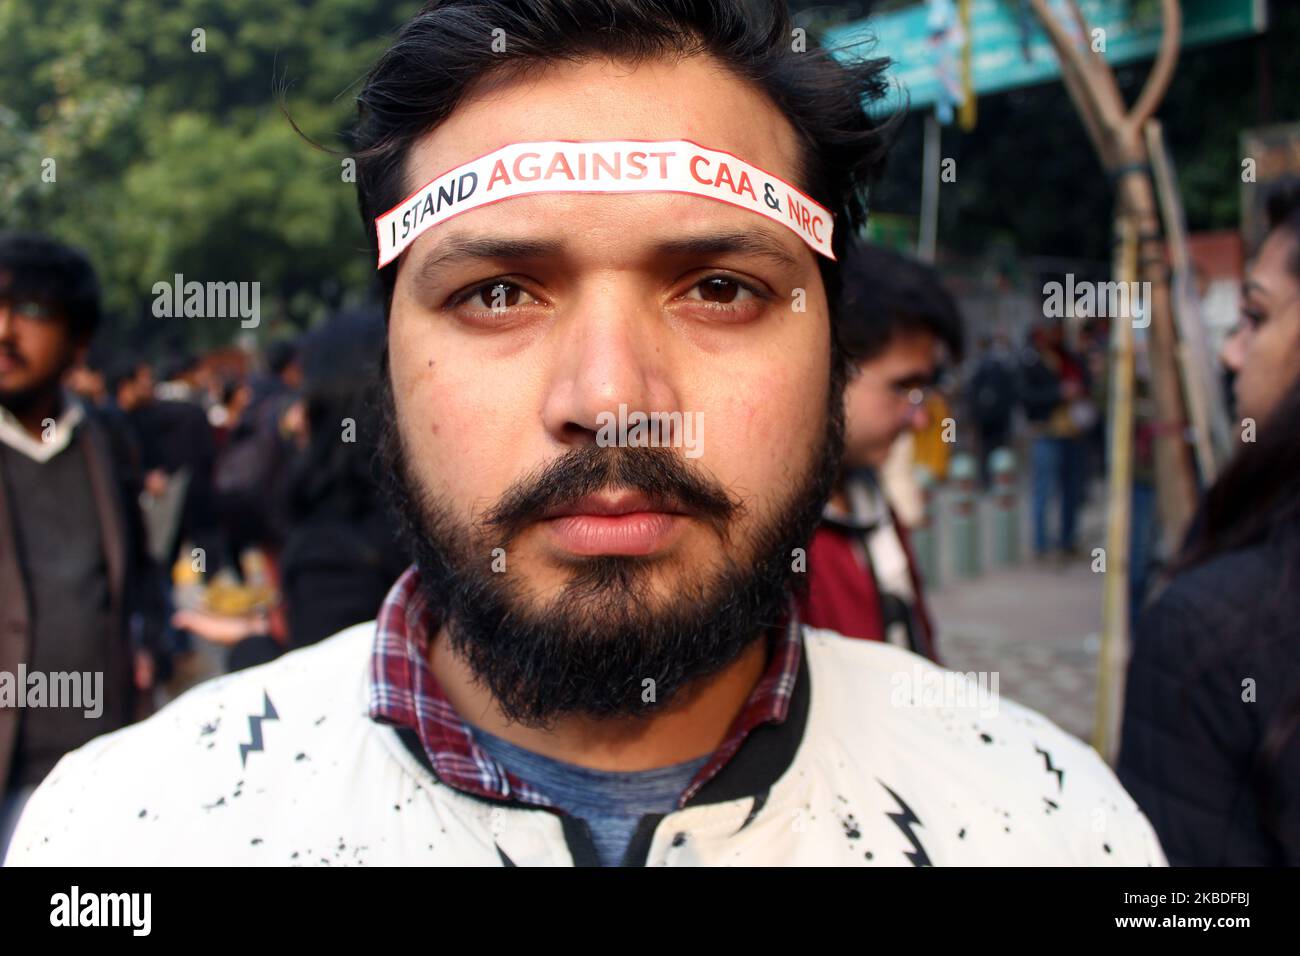 A protester is seen during the protest against the government's Citizenship Amendment Bill (CAB) and National Register of Citizens (NRC) at Jantar Mantar in New Delhi on December 24, 2019. The Citizenship Amendment Act has triggered nationwide protests as it paved way for six minority communities Hindus, Sikhs, Jain, Buddhists, Zoroastrians and Christians who came to India from Pakistan, Bangladesh or Afghanistan to escape religious persecution before December 31, 2014 to get Indian citizenship. So far, 17 people have died and thousands arrested in two weeks of protests in India against the co Stock Photo